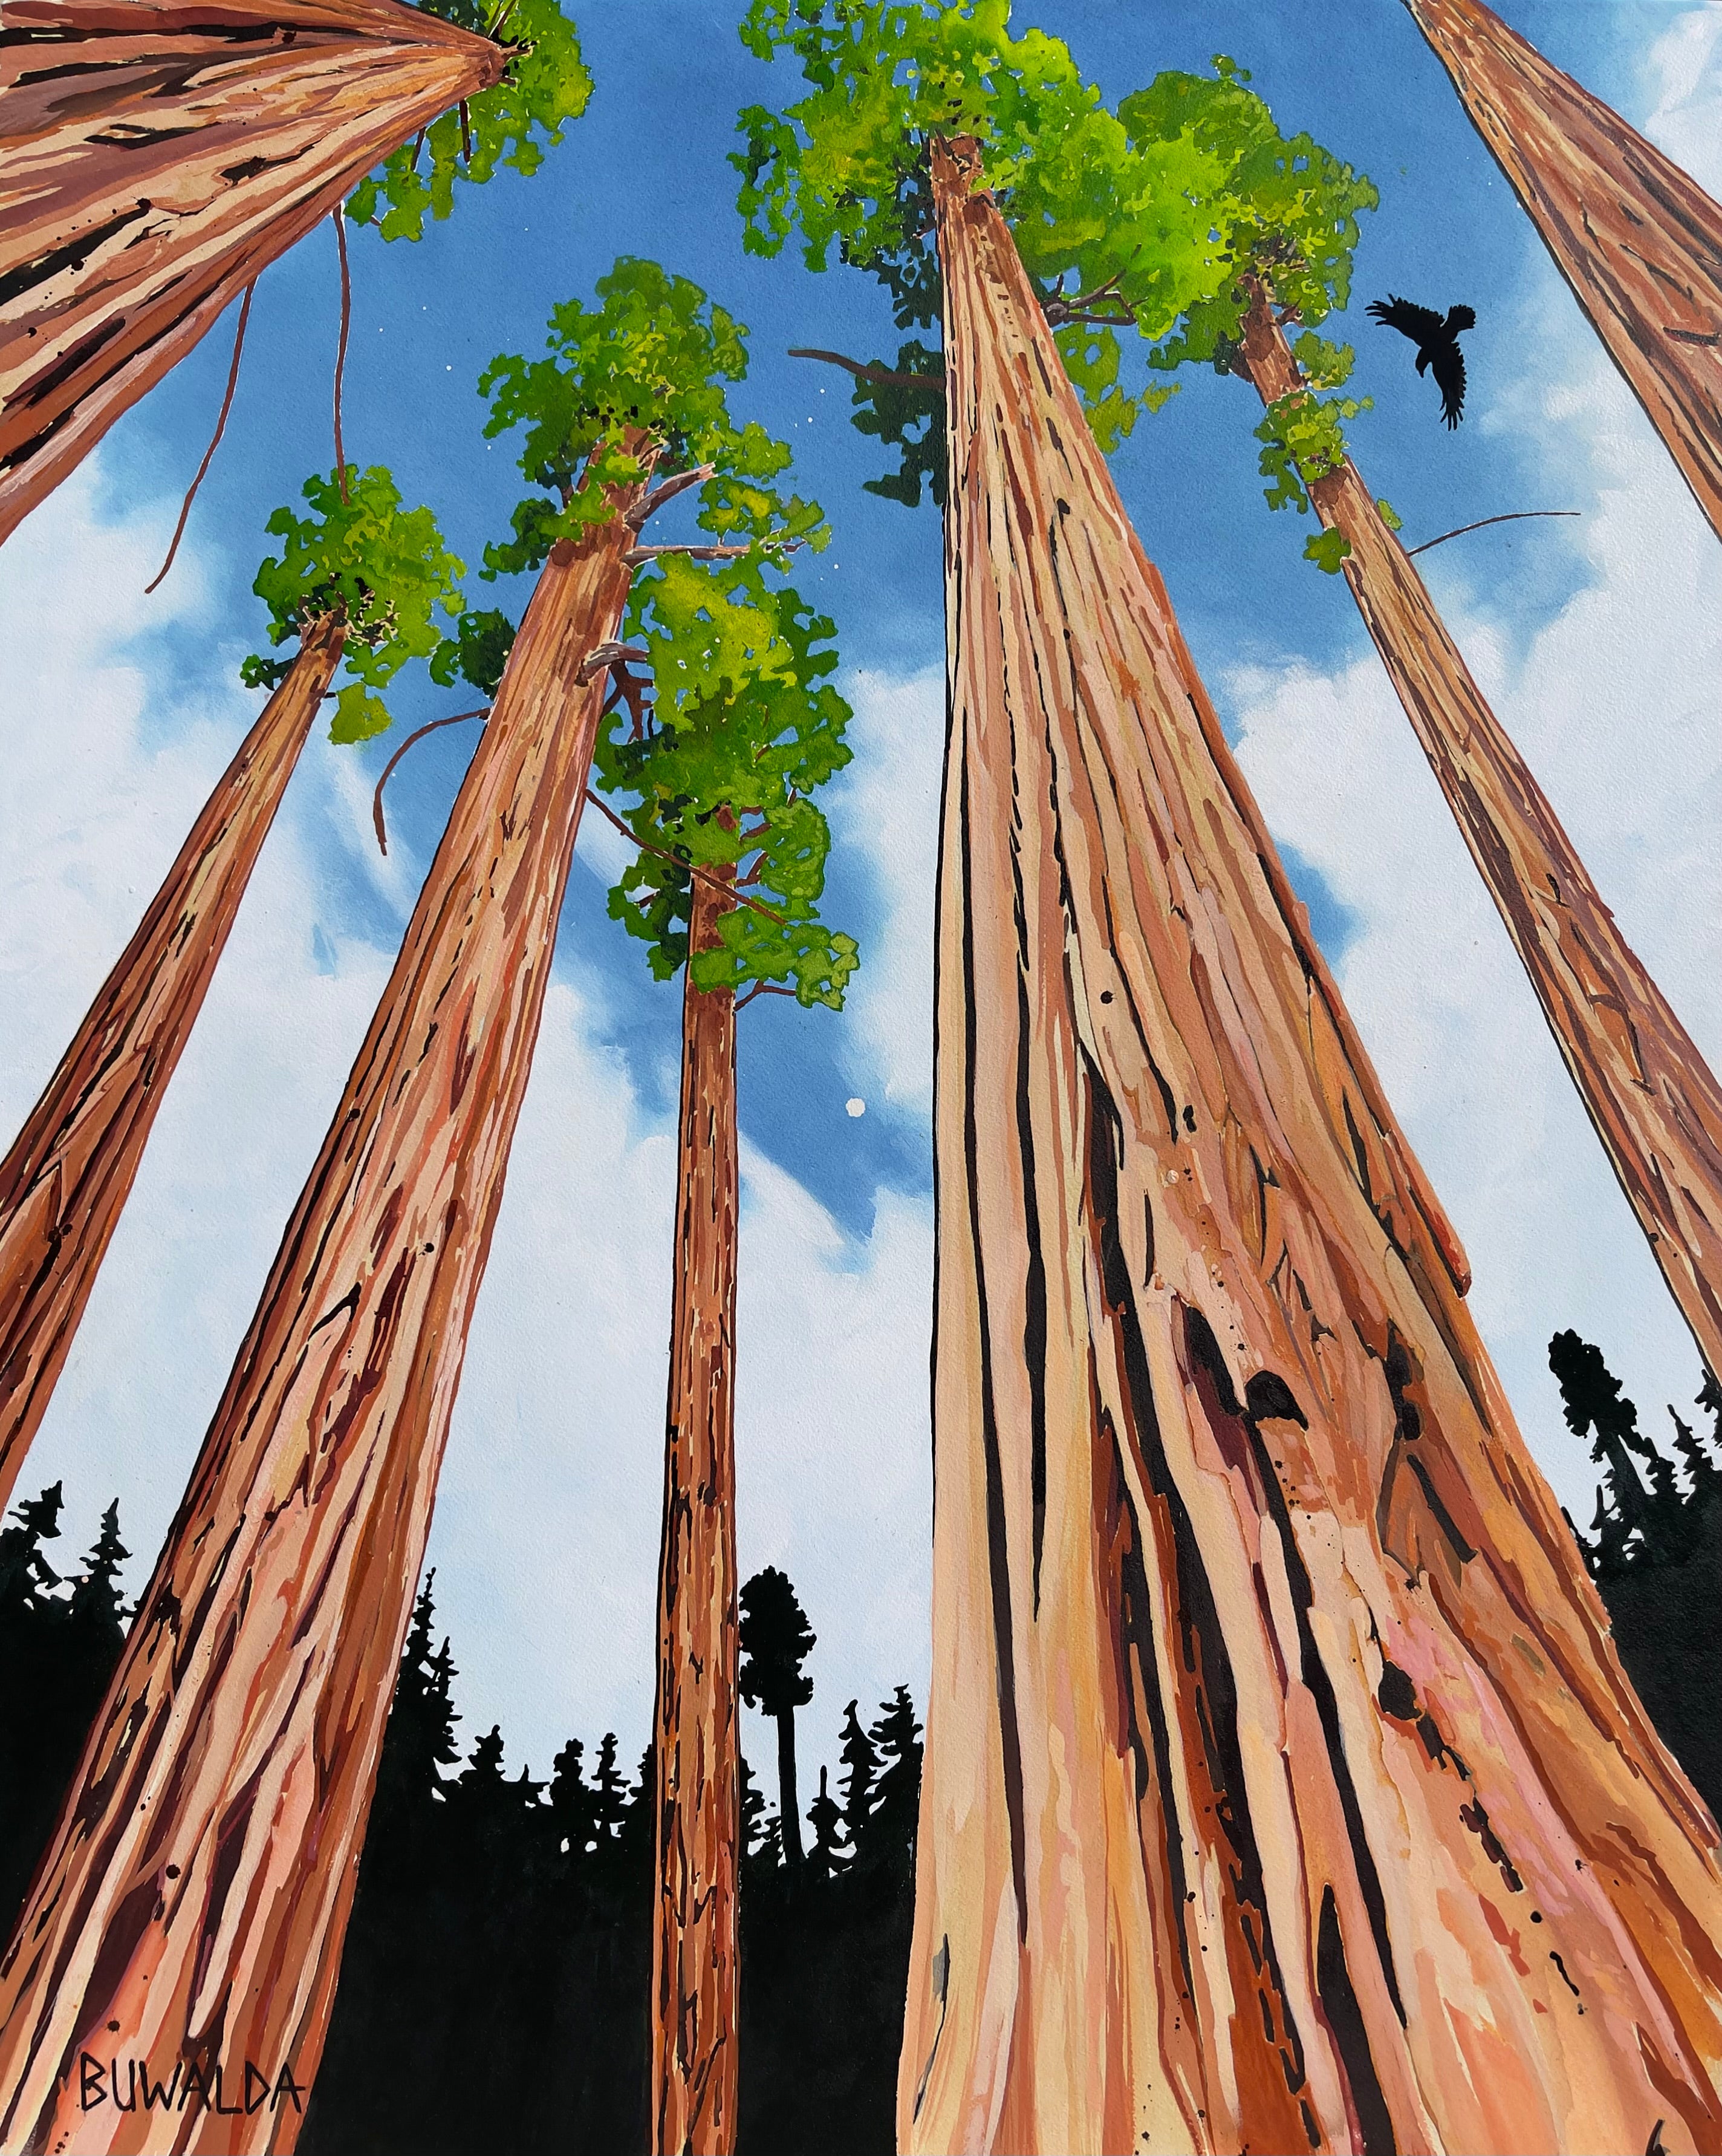 Original Painting, "Redwoods", Acrylic Ink on Stretched and Mounted Arches 24"x30" Christmas Sale Price